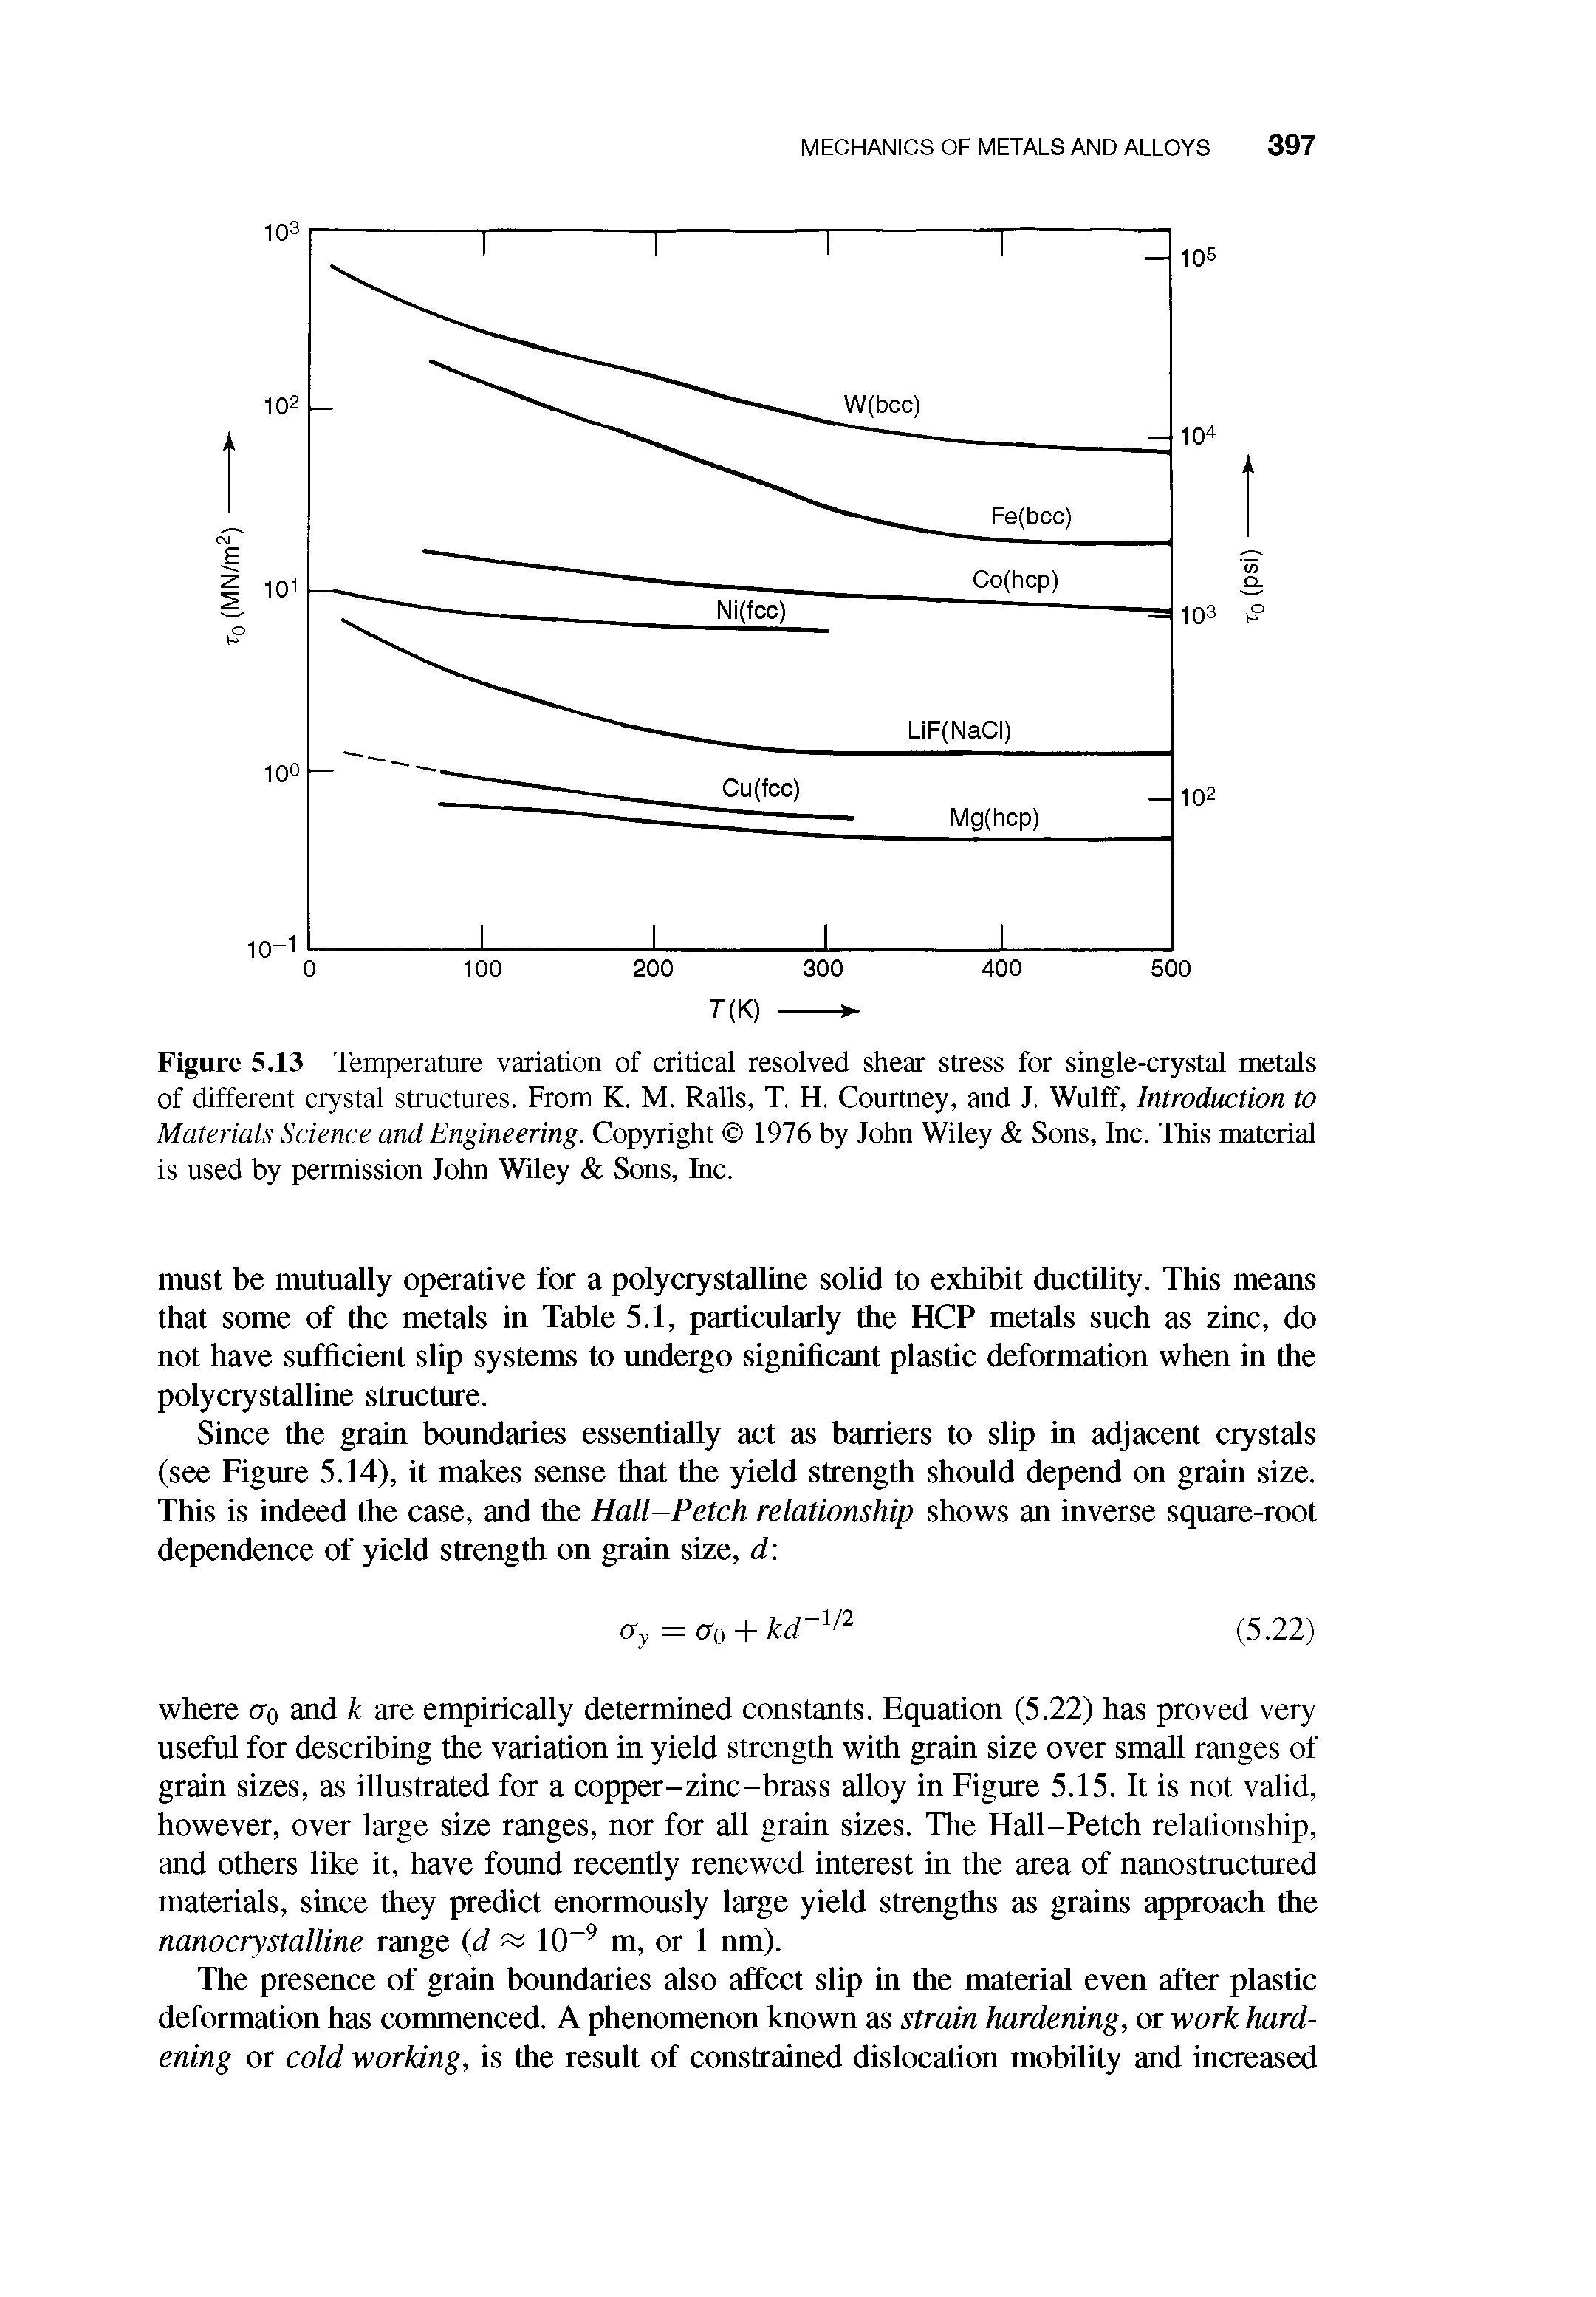 Figure 5.13 Temperature variation of critical resolved shear stress for single-crystal metals of different crystal structures. From K. M. Ralls, T. H. Courtney, and J. Wulff, Introduction to Materials Science and Engineering. Copyright 1976 by John Wiley Sons, Inc. This material is used by permission John Wiley Sons, Inc.